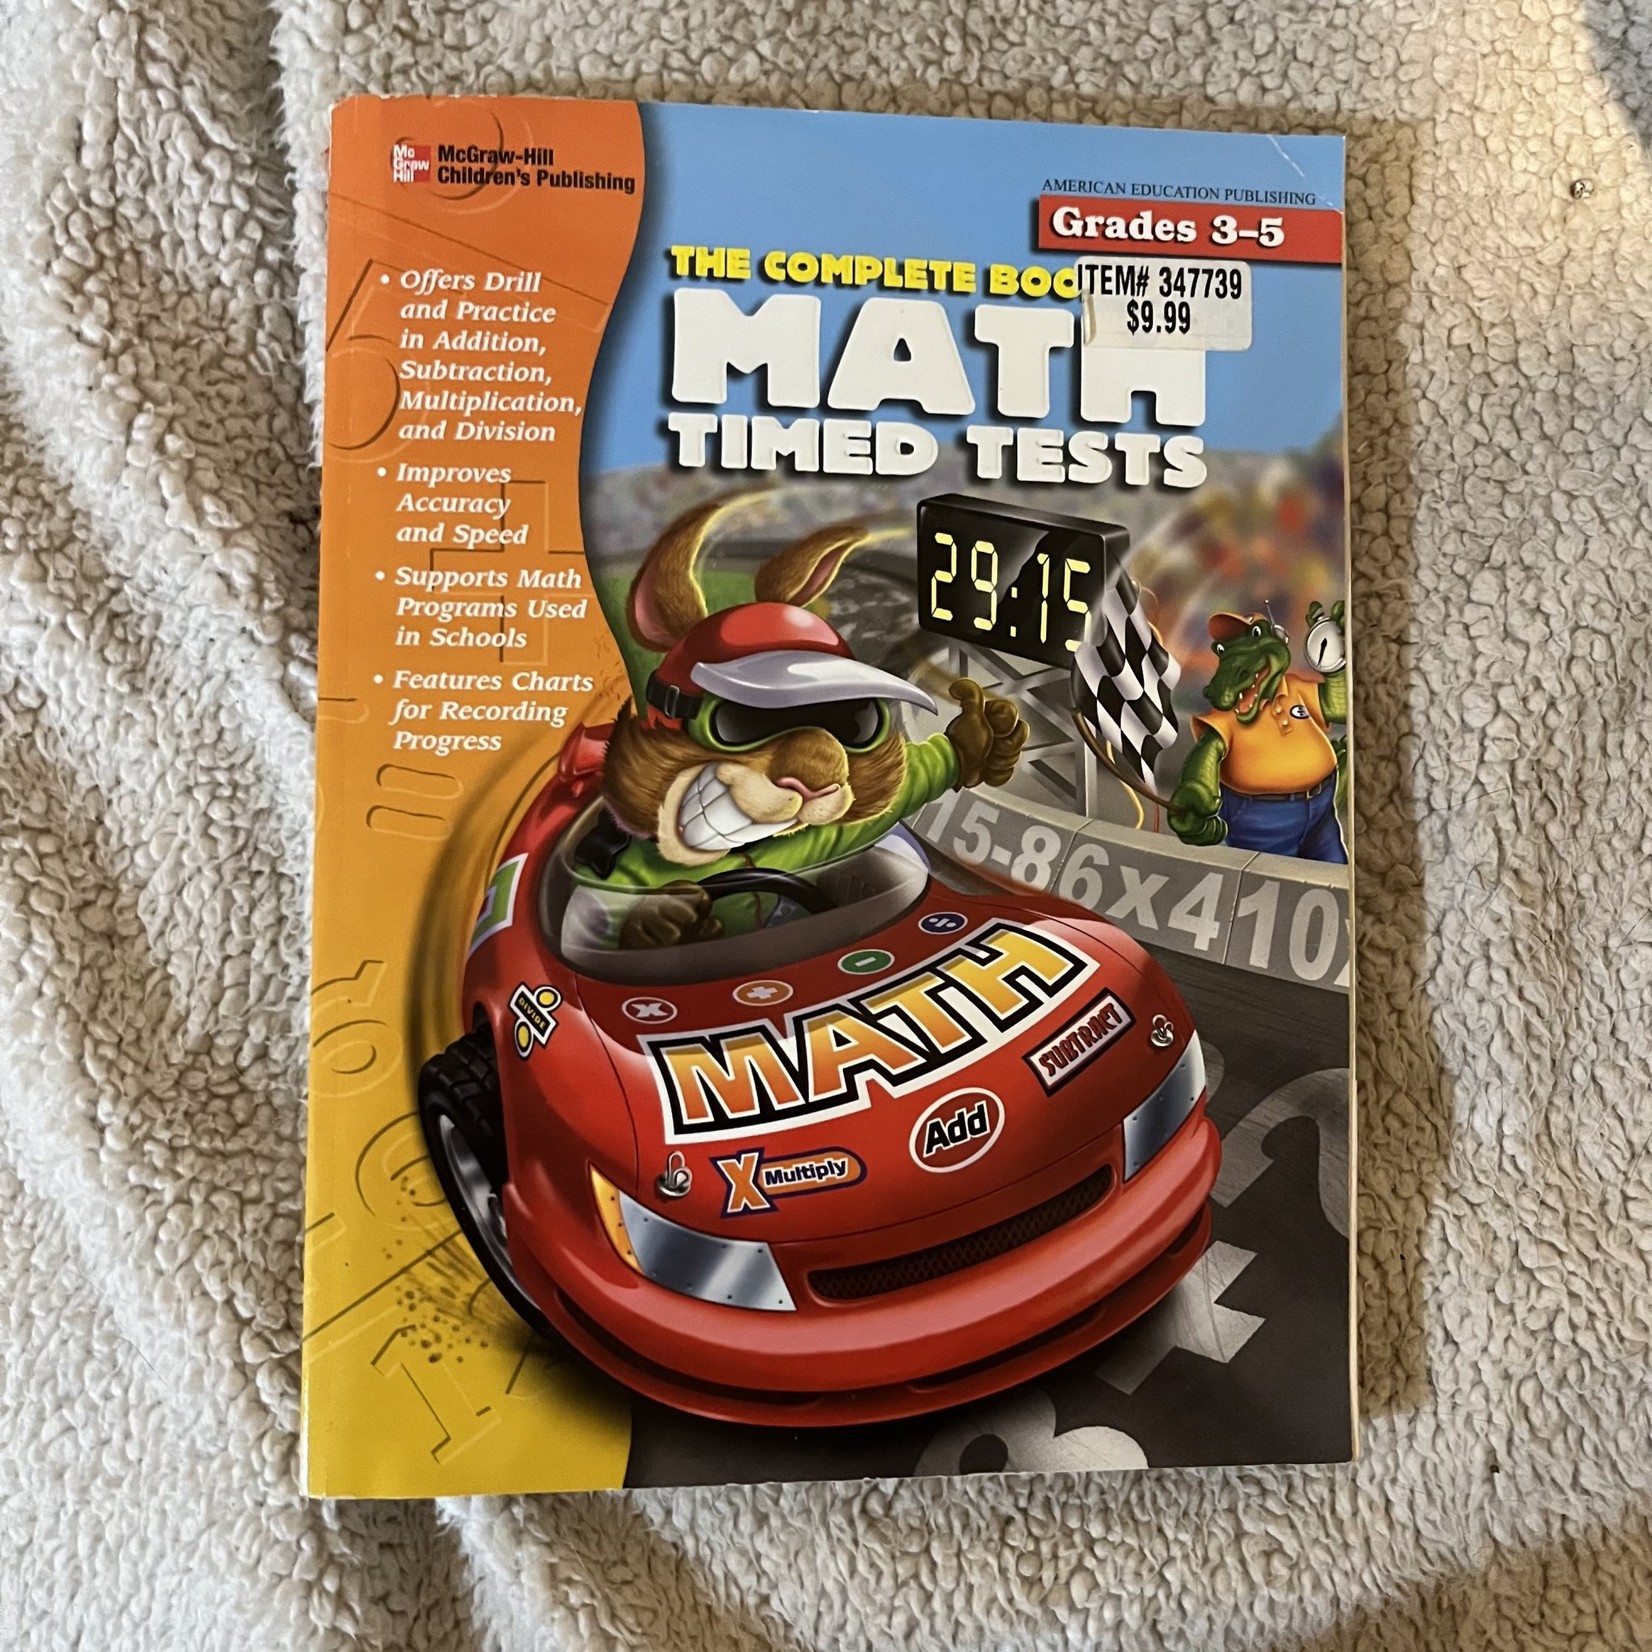 The Complete Book of Math Timed Tests